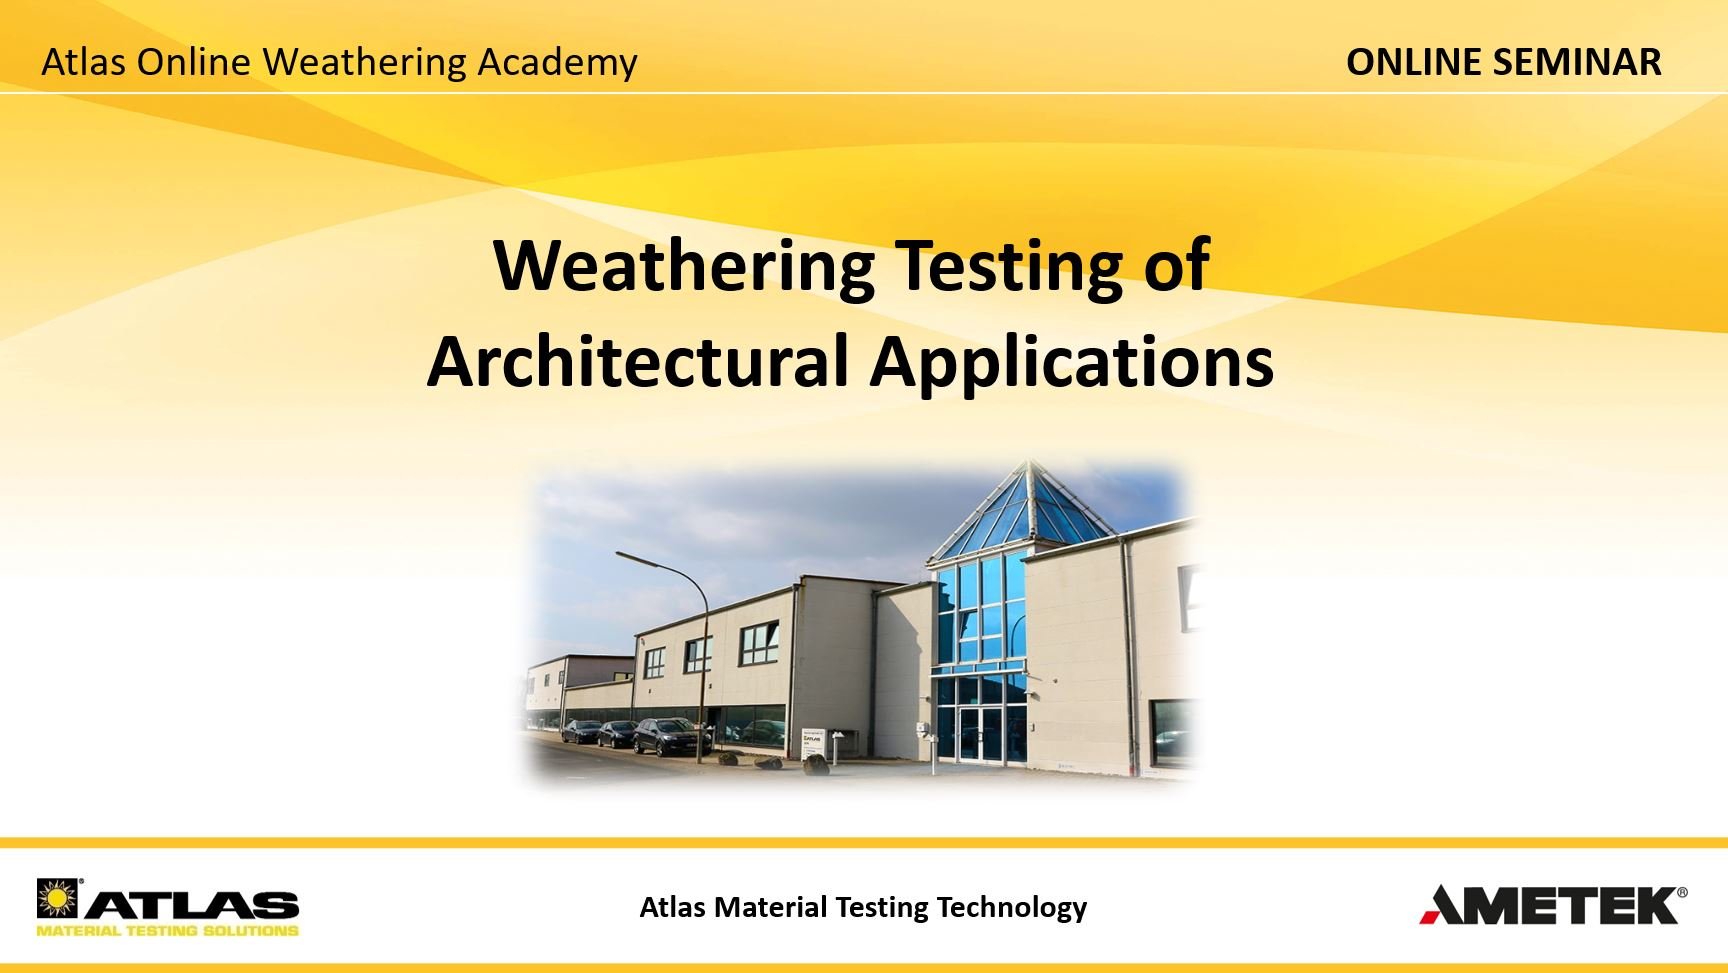 Online Seminar-Cover-Architectural-Applications-Testing-AR-2021-03-24